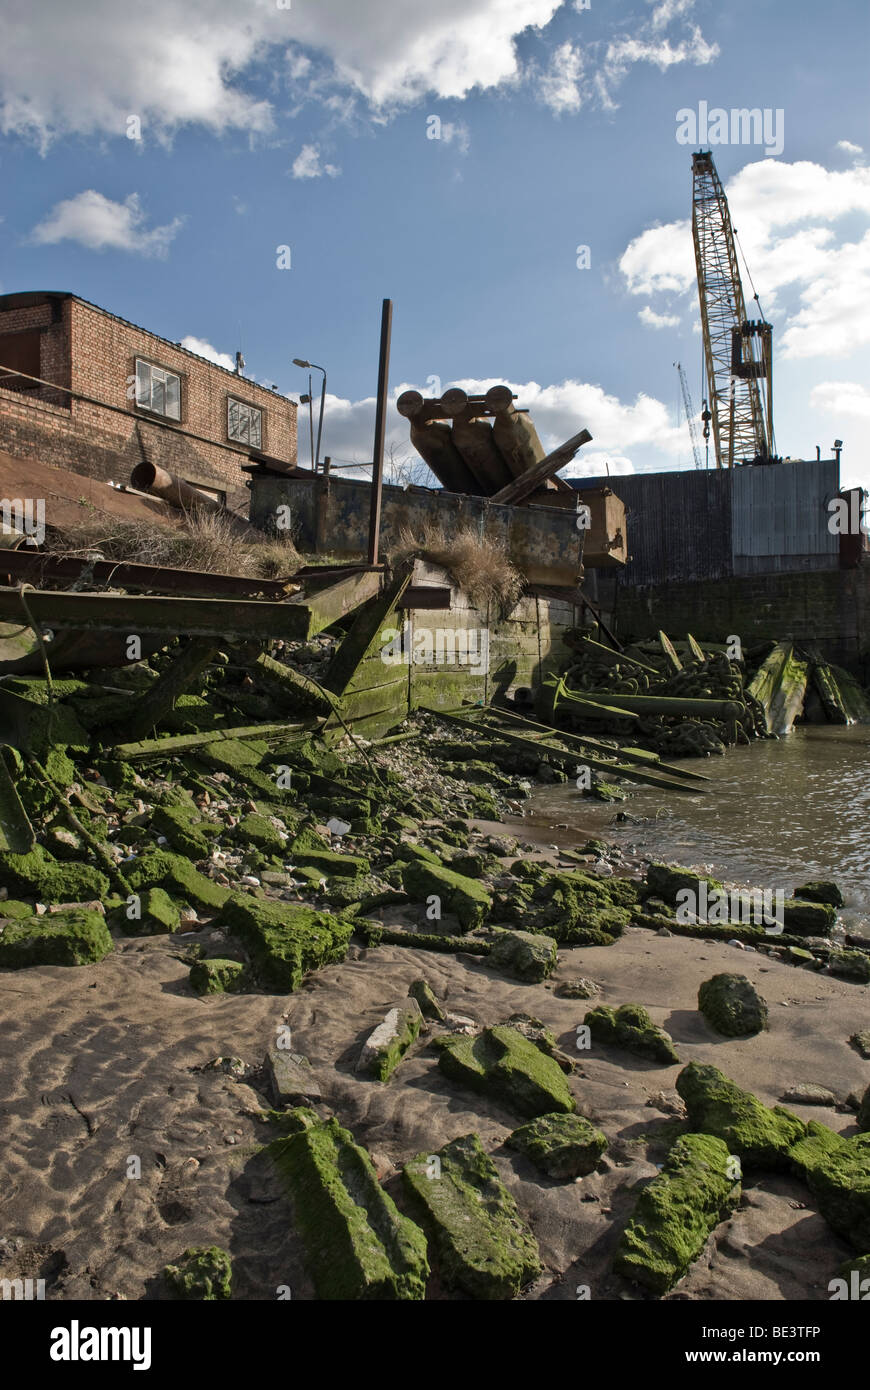 Working ship yard with scrap metal by the banks of the Thames, London, UK Stock Photo